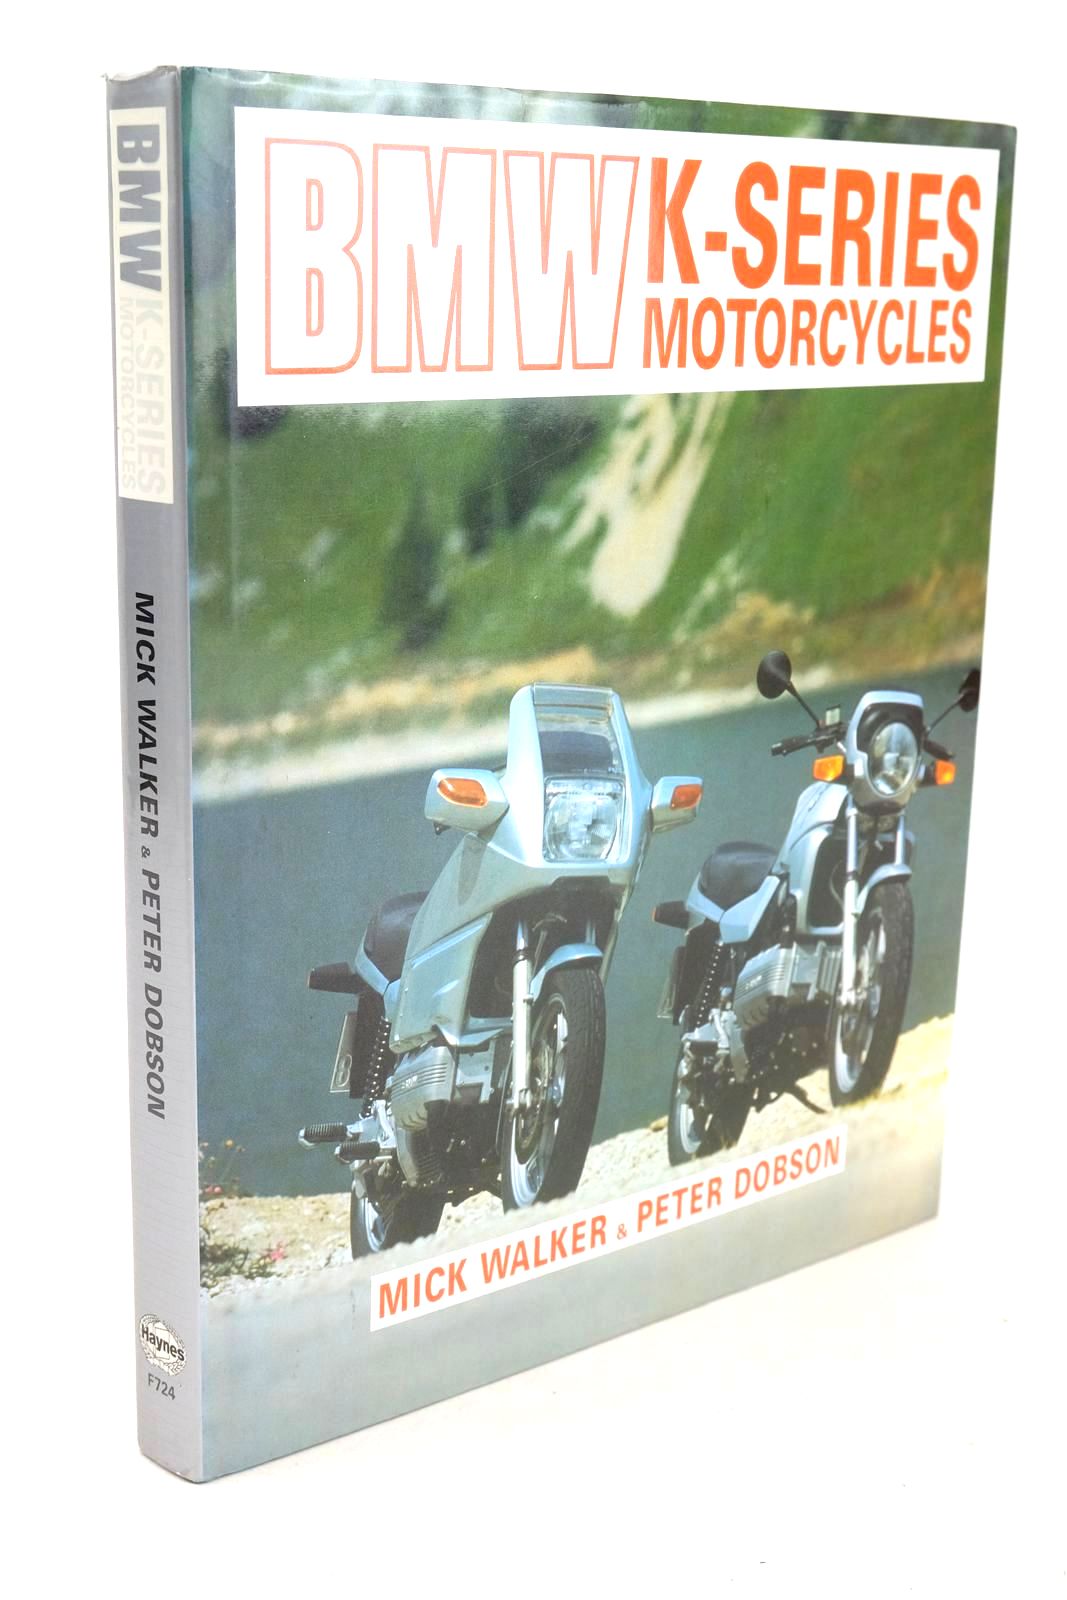 Photo of BMW K-SERIES MOTORCYCLES written by Walker, Mick Dobson, Peter published by Haynes Publishing Group (STOCK CODE: 1326185)  for sale by Stella & Rose's Books